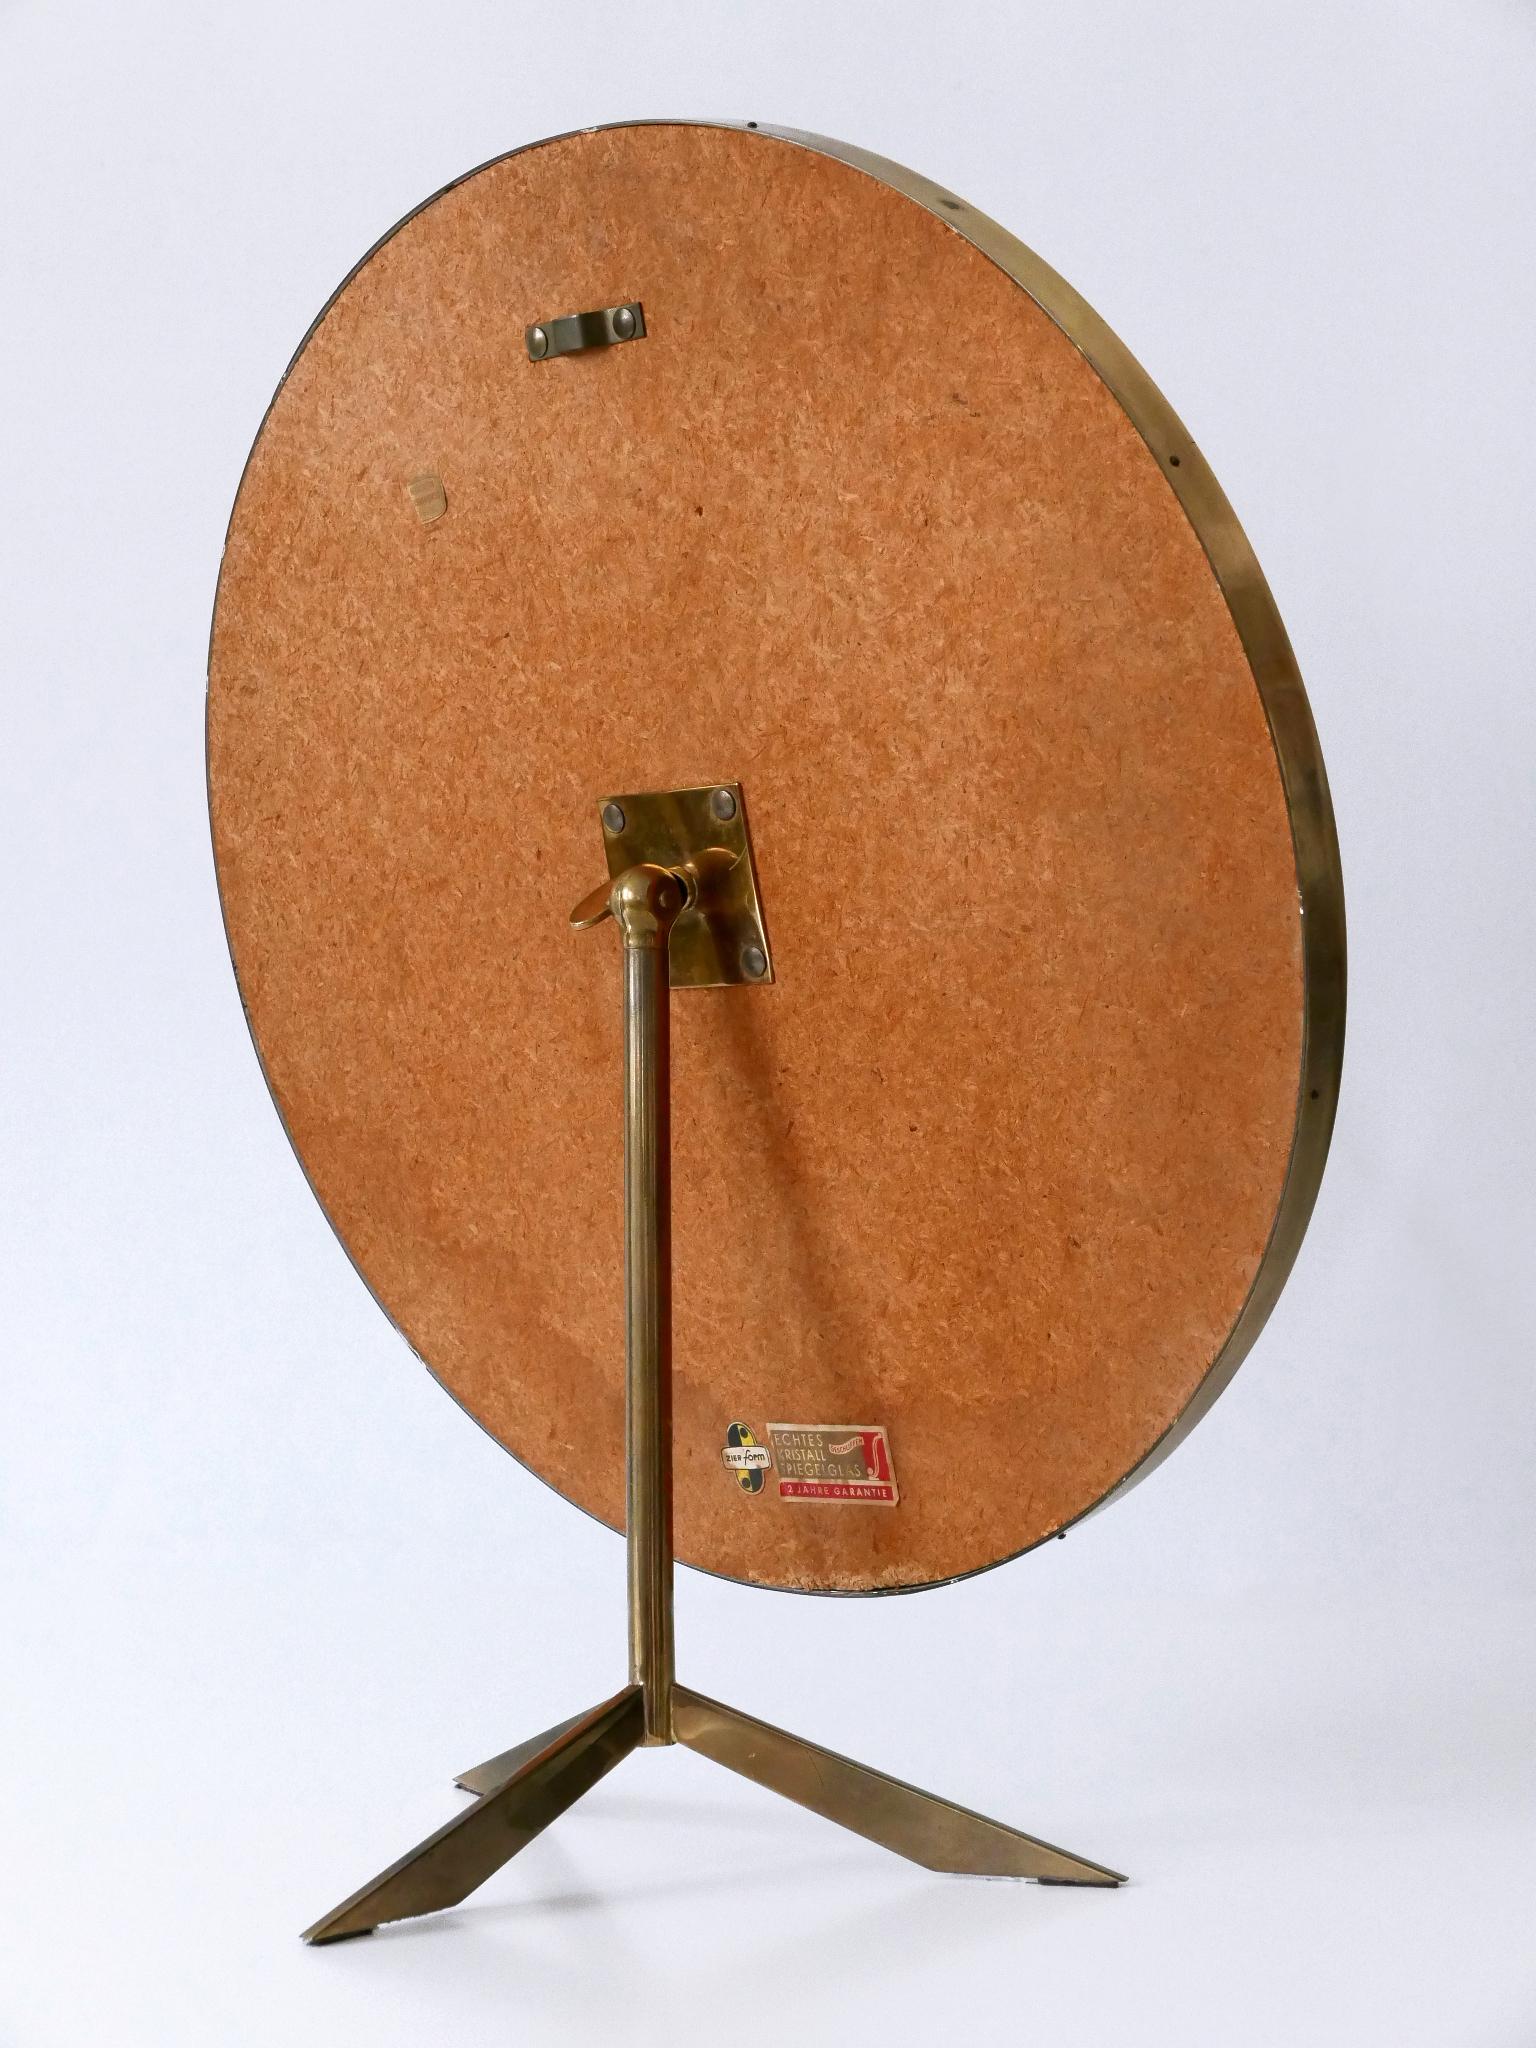 Elegant Mid-Century Modern Wall or Vanity Mirror by Zierform Germany 1950s For Sale 15